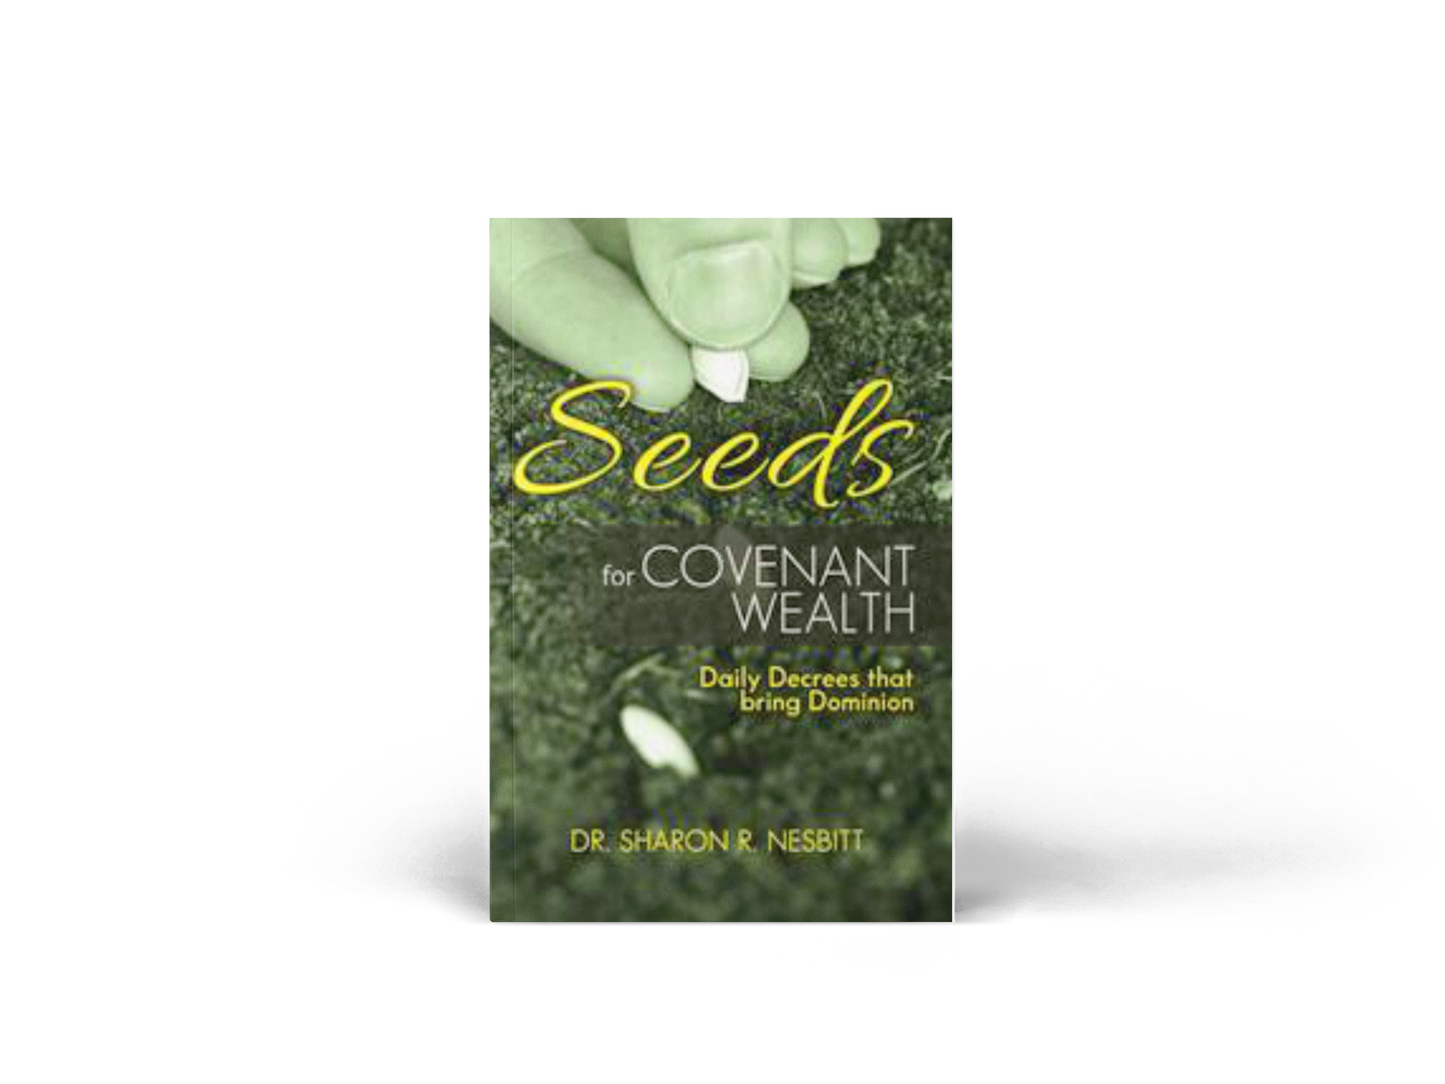 Seeds for Covenant Wealth